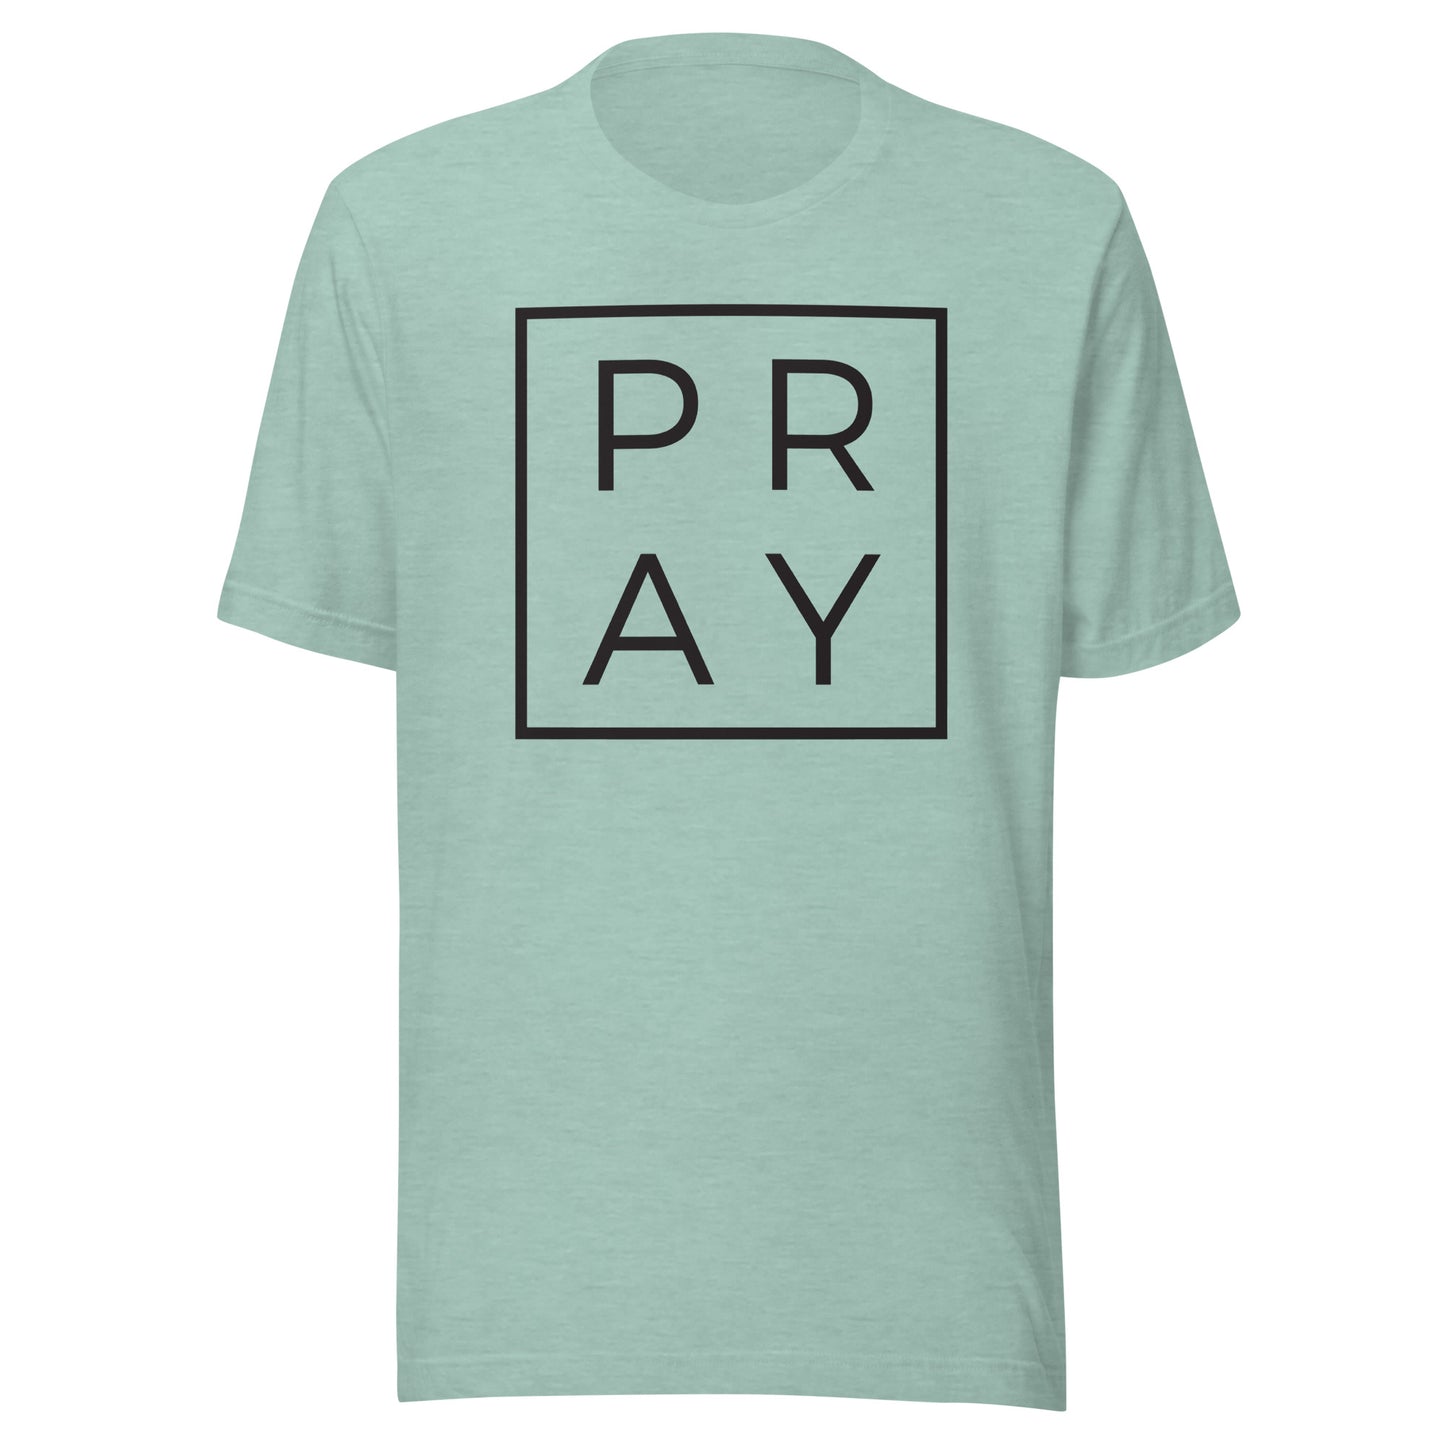 Experience Connection through Prayer with our "Pray" Bella Canvas Shirt